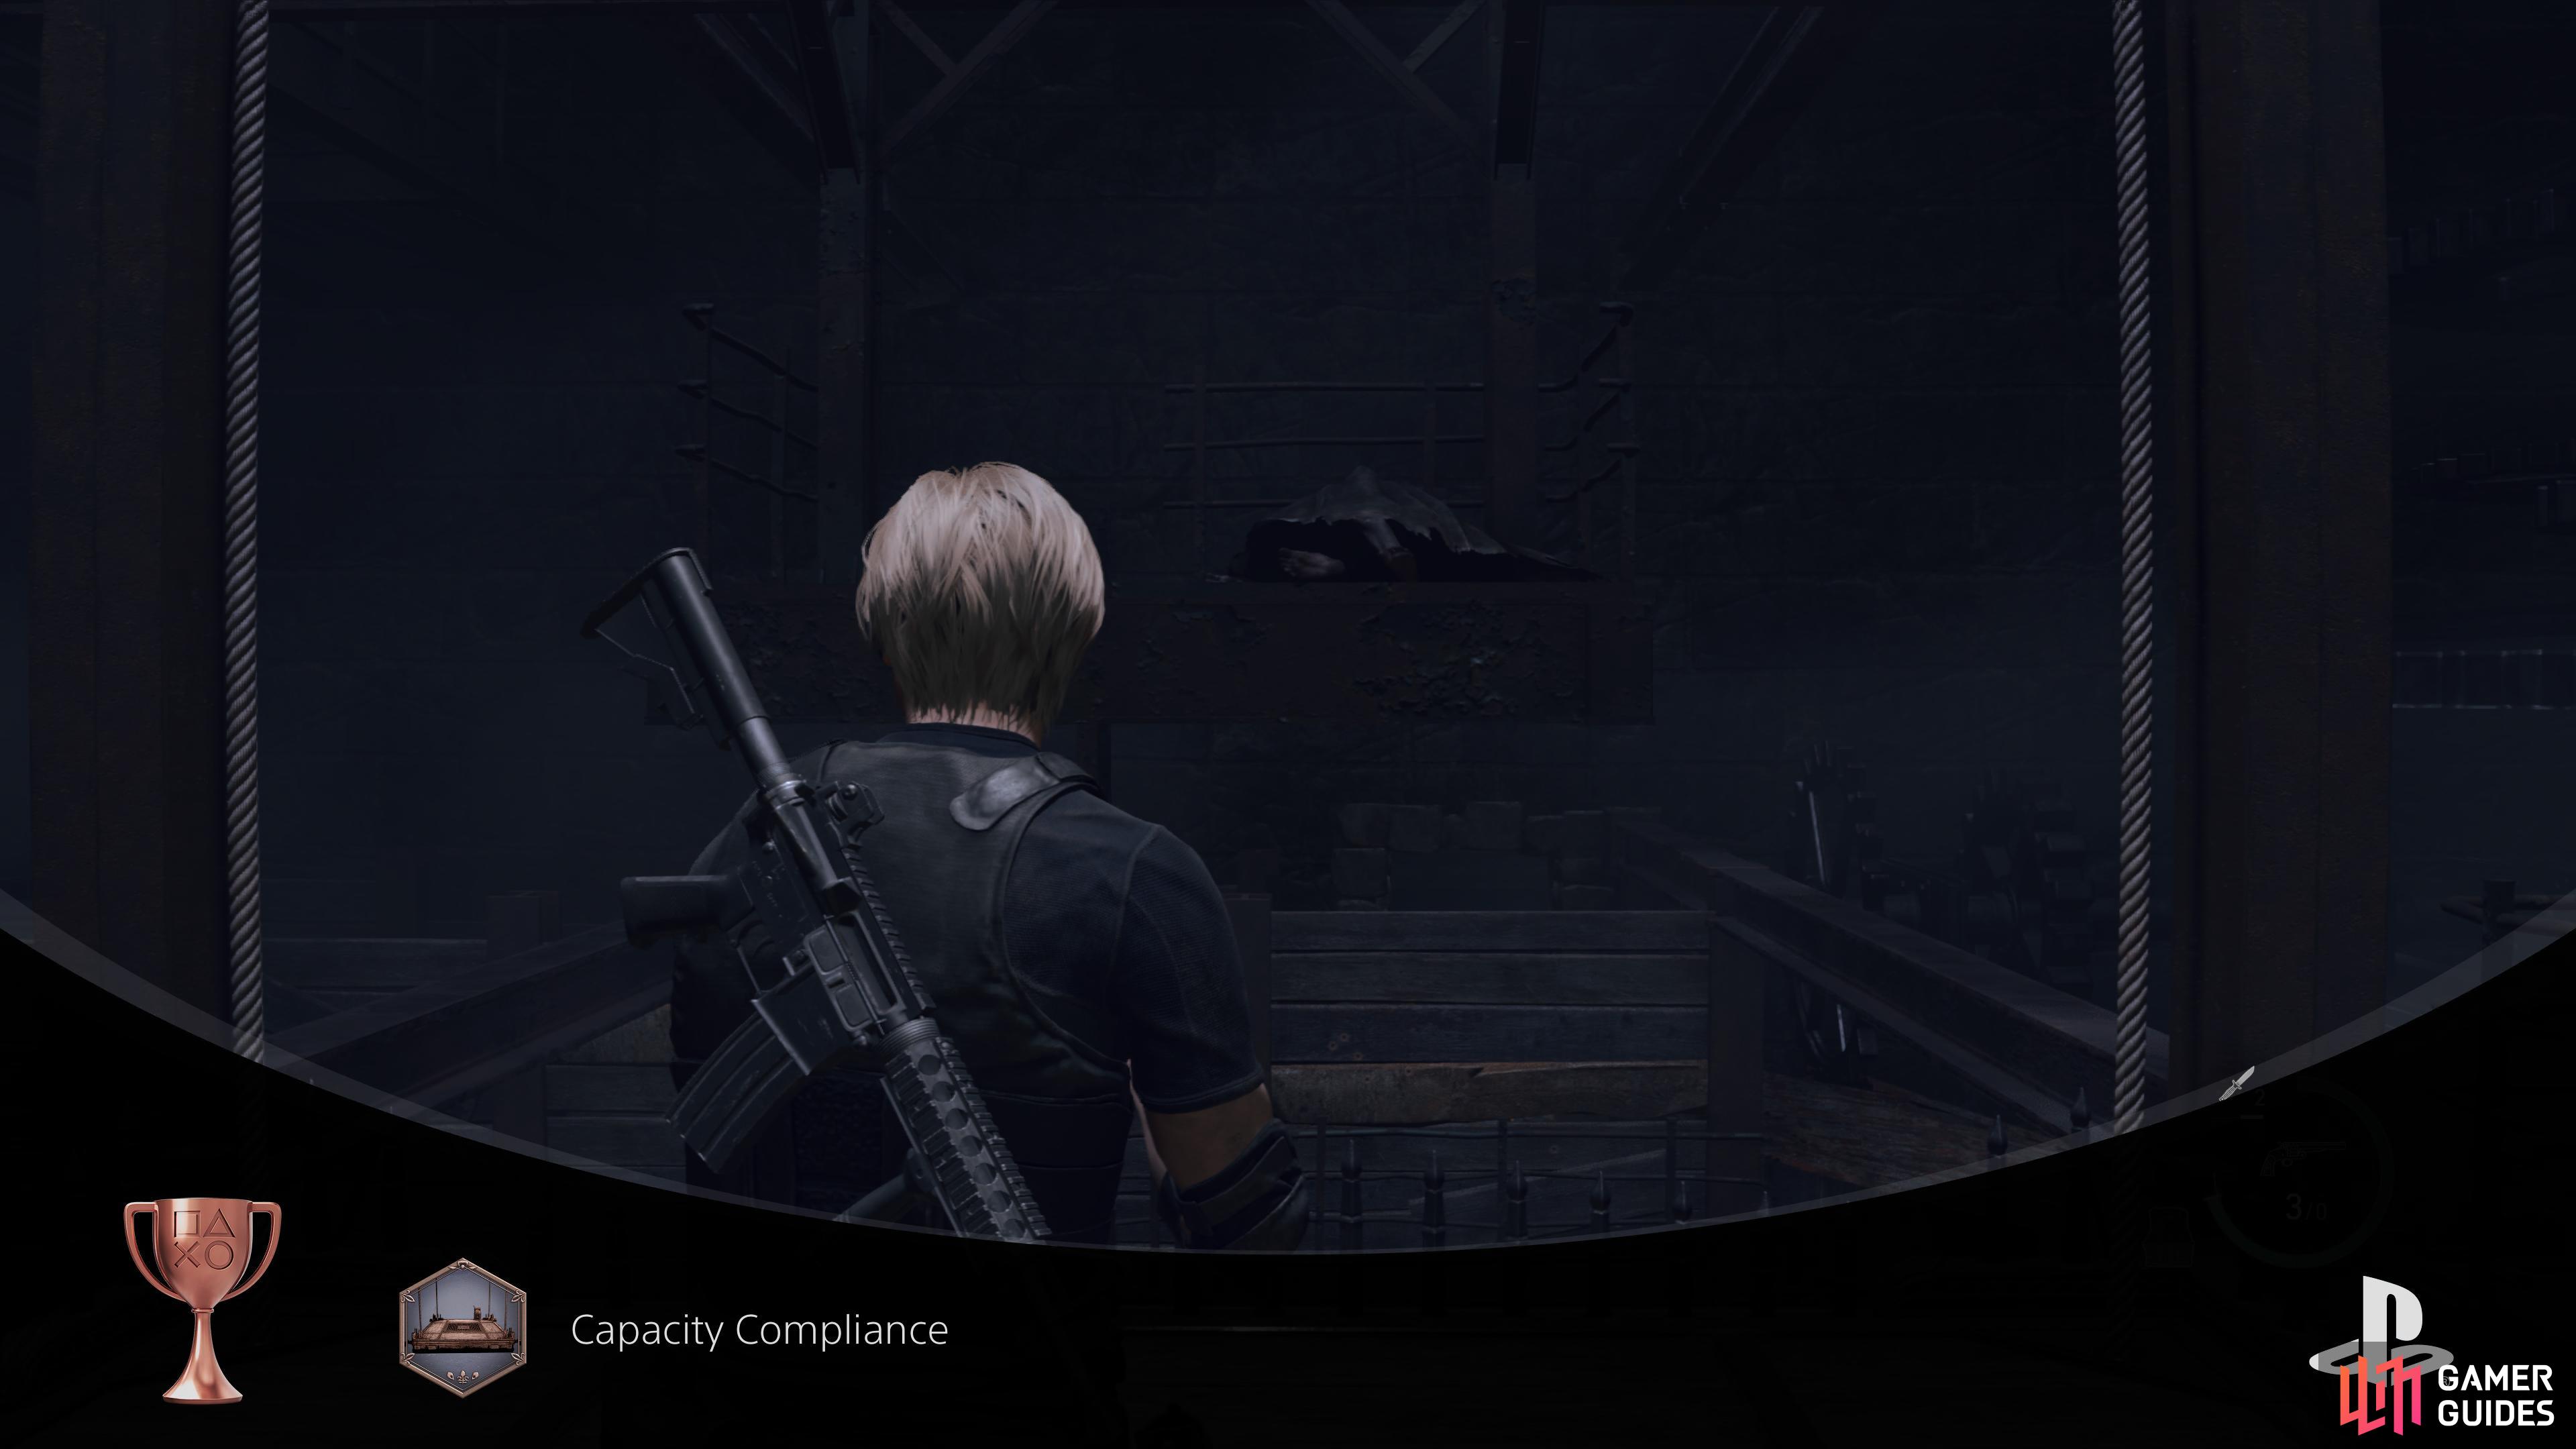 Capacity Compliance is one of the toughest campaign trophies to get in Resident Evil 4 Remake.